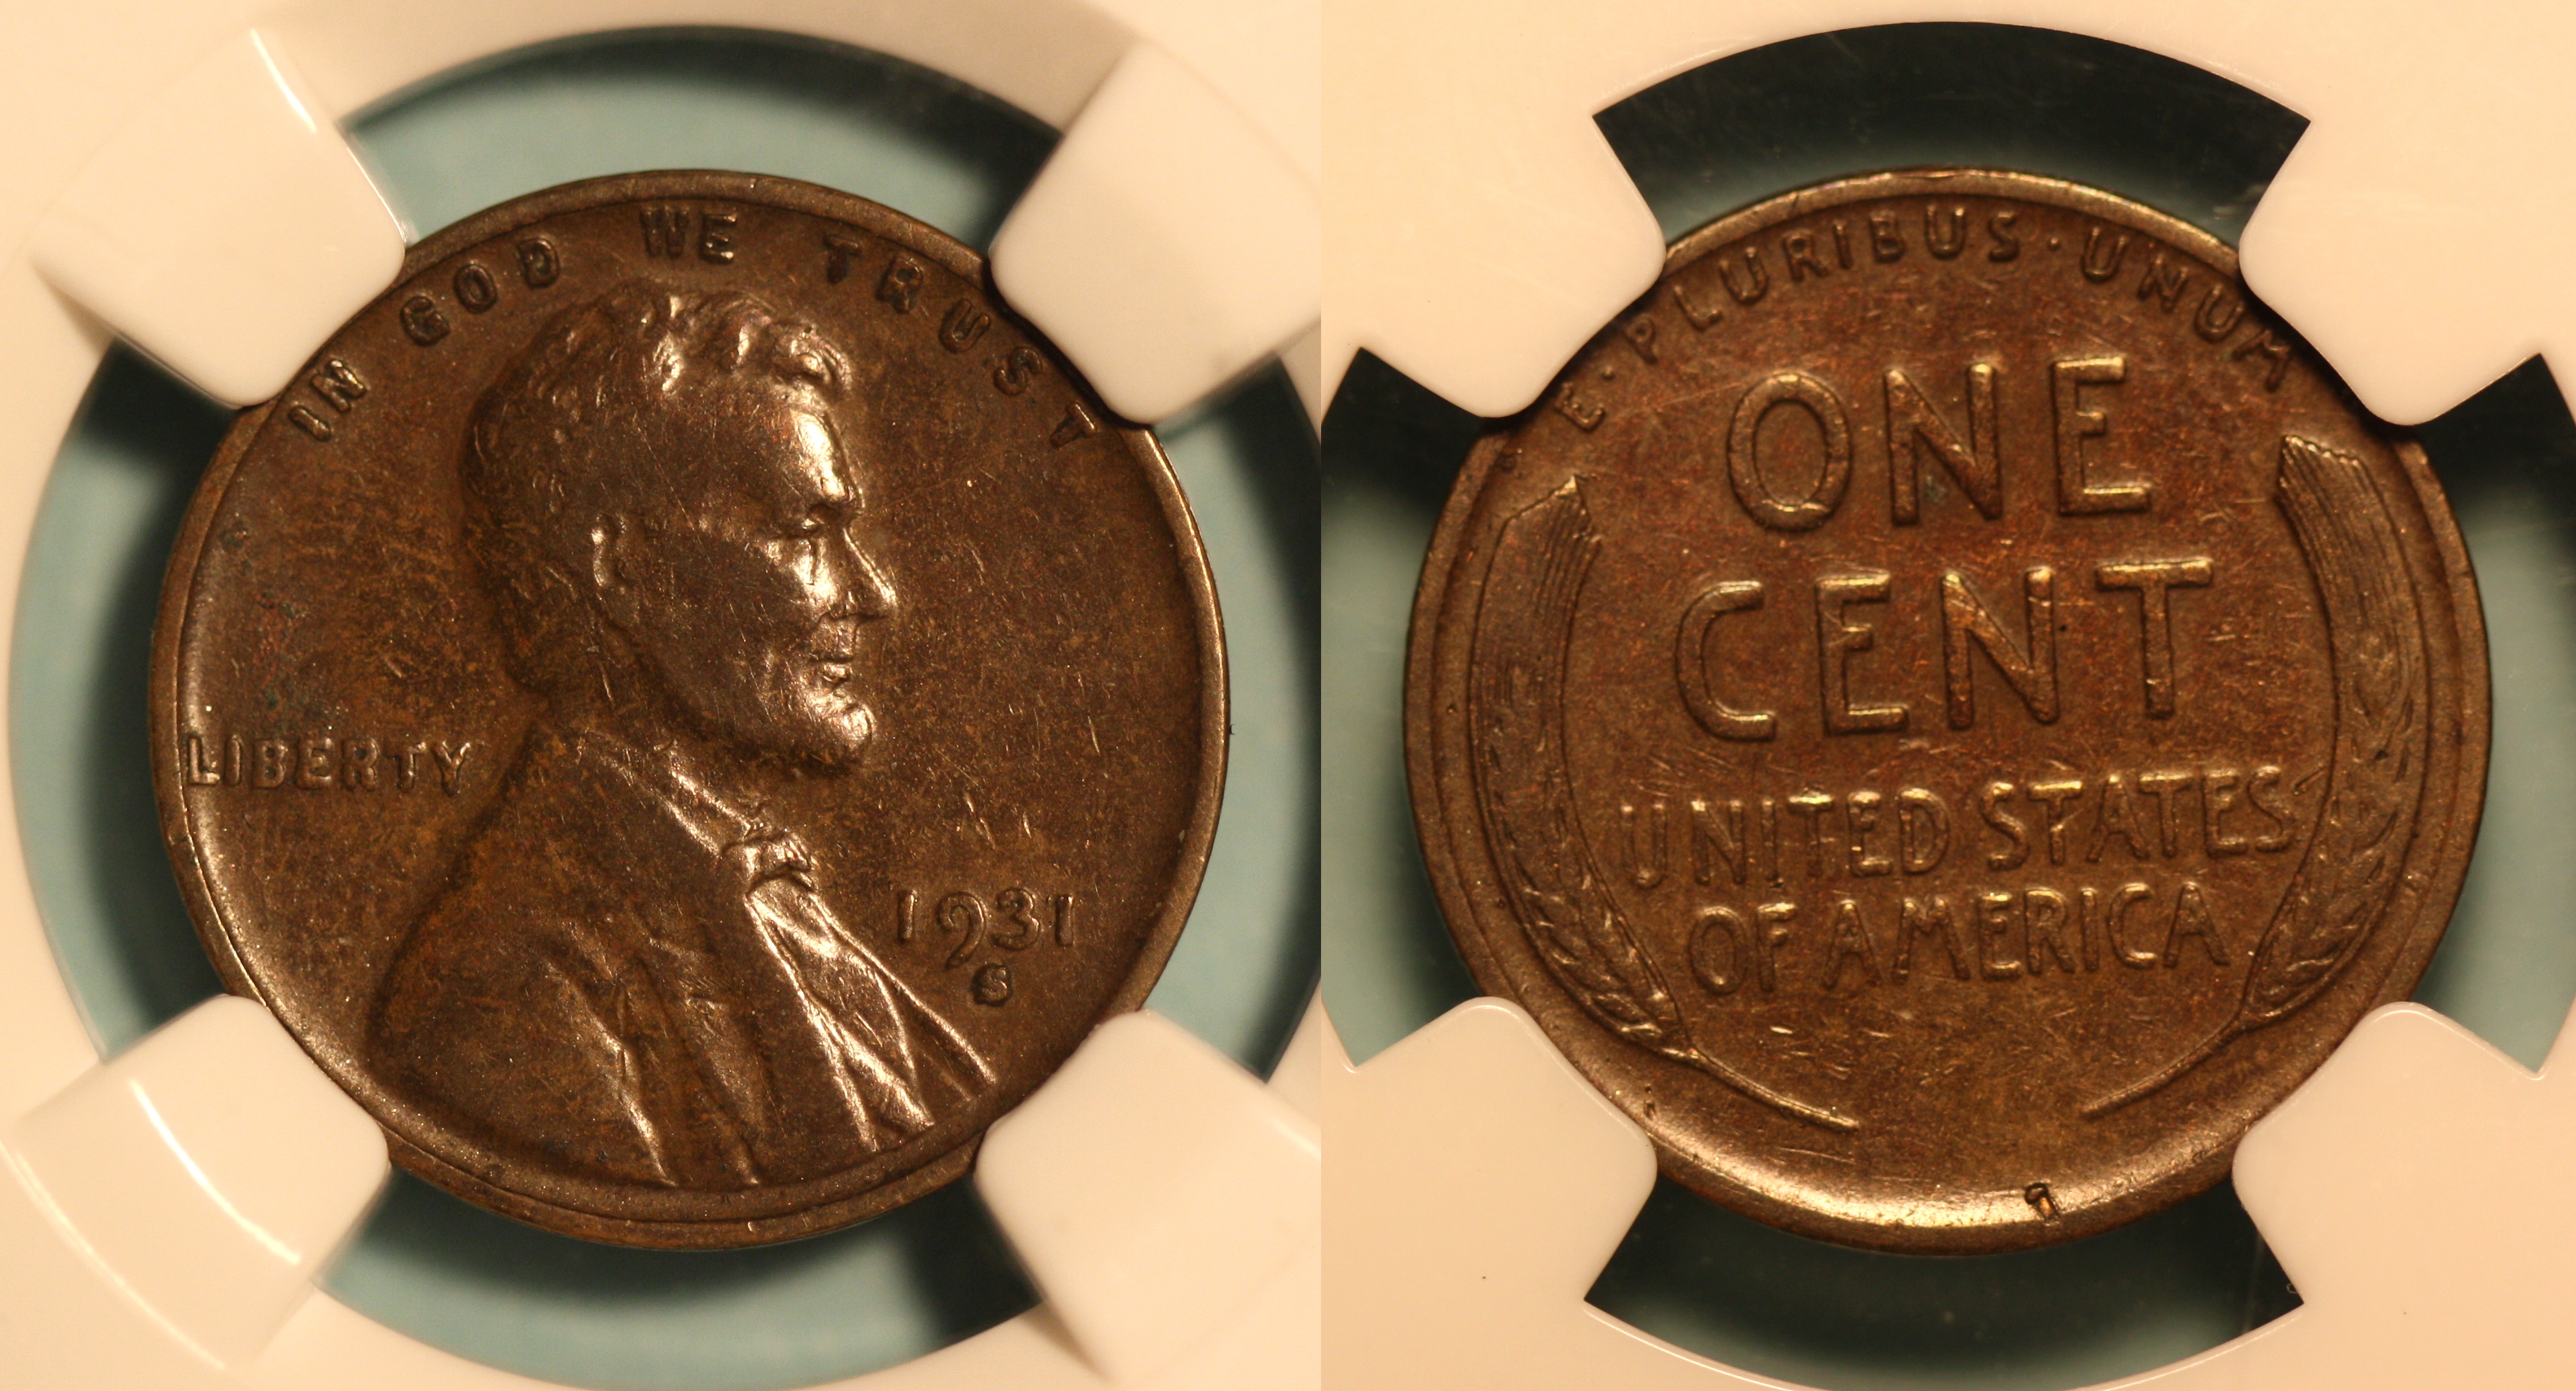 1931-S Lincoln Cent NGC Fine-15 camera